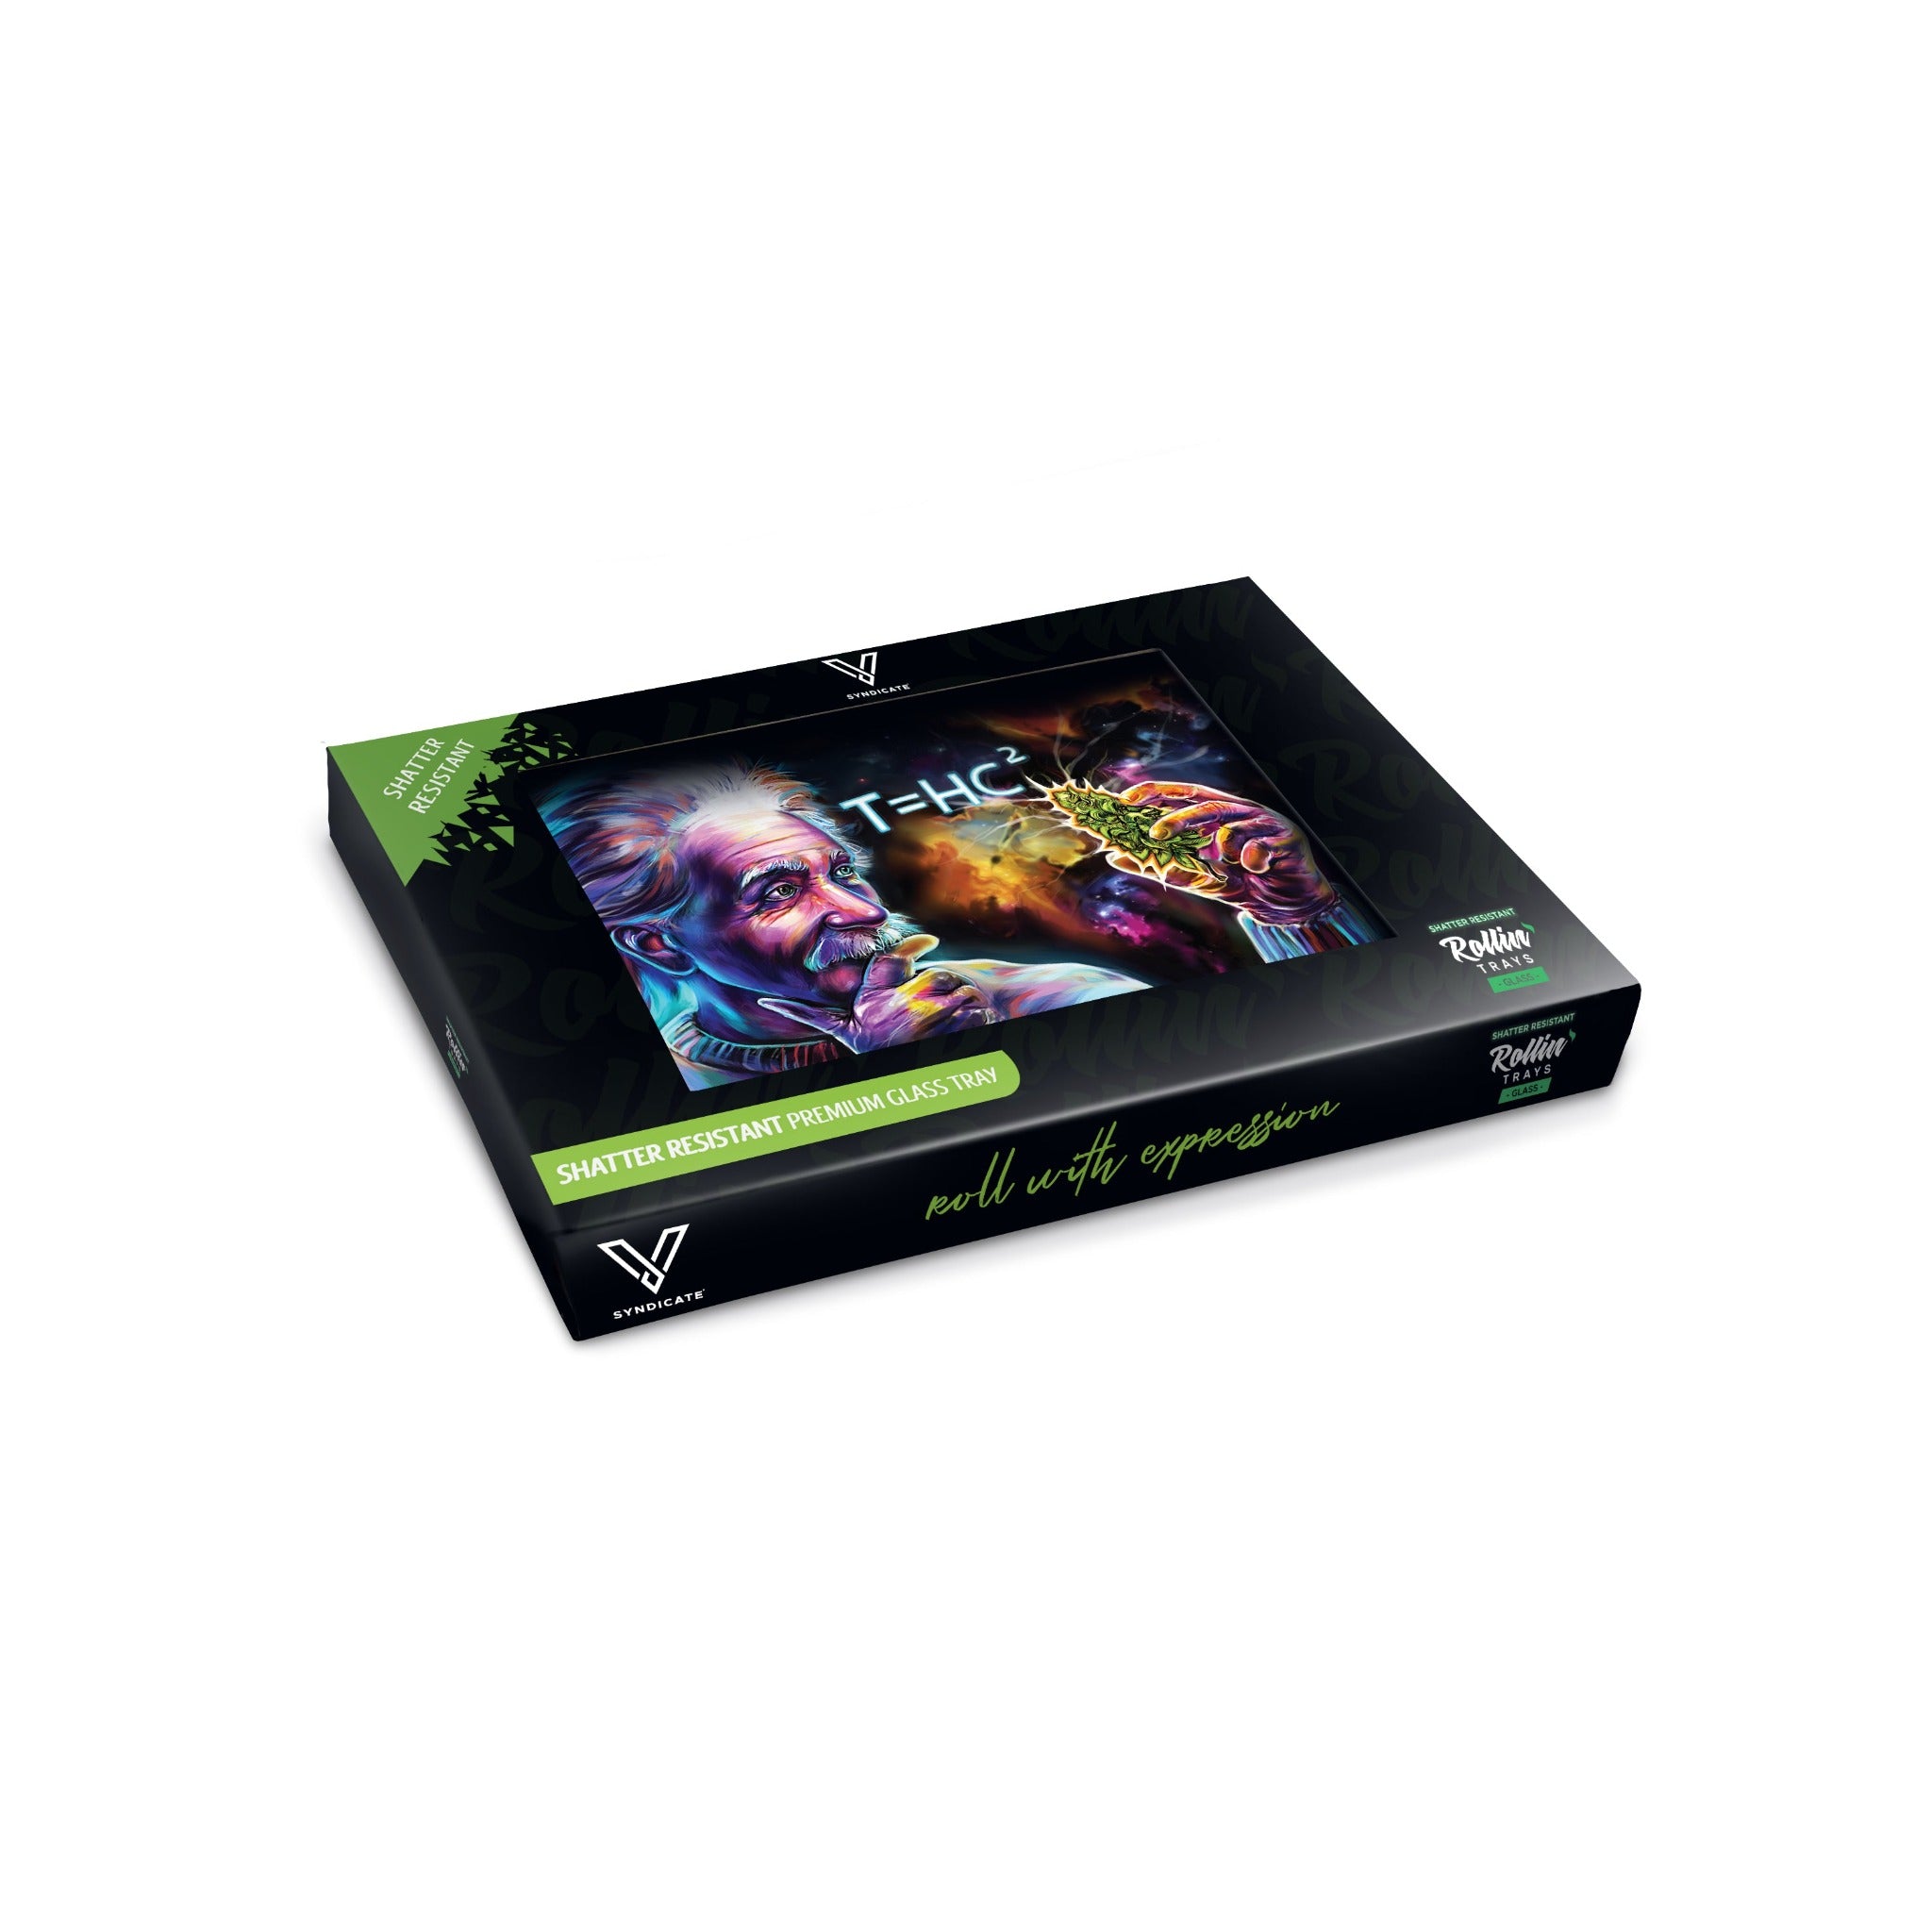 V Syndicate T=HC2 Glass Rolling Tray Rolling Tray VS Small Black Hole 